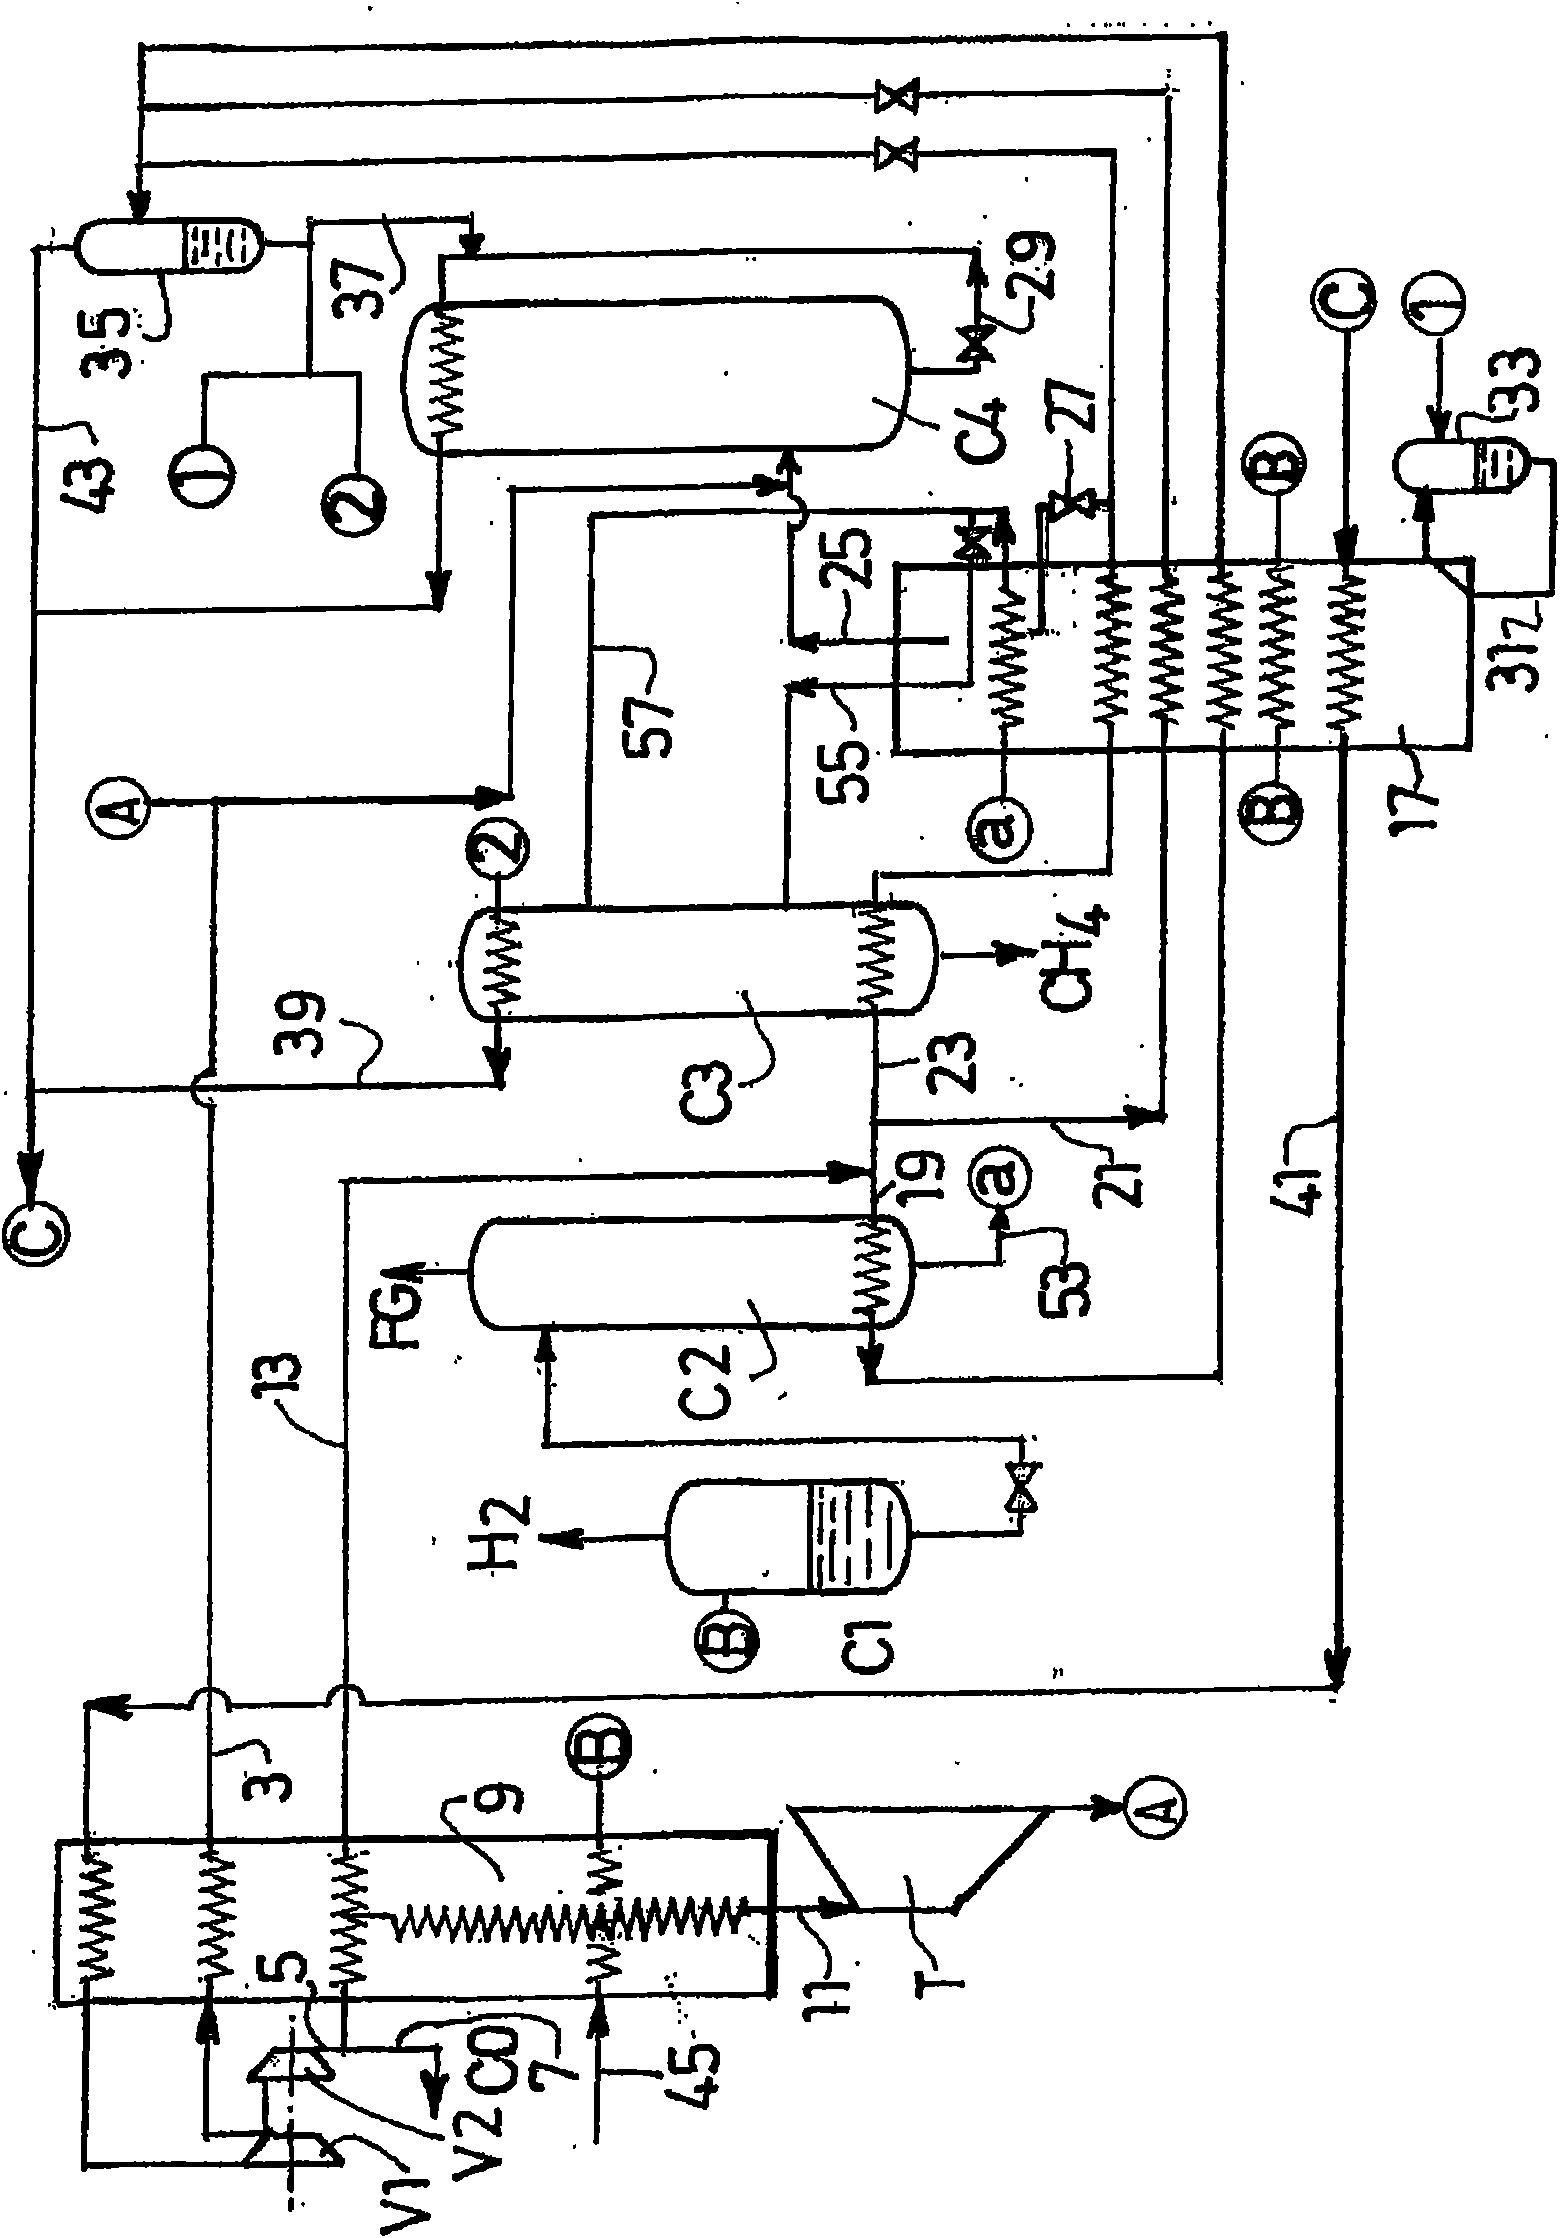 Method for separating a mixture of carbon monoxide, methane, hydrogen, and optionally nitrogen by cryogenic distillation